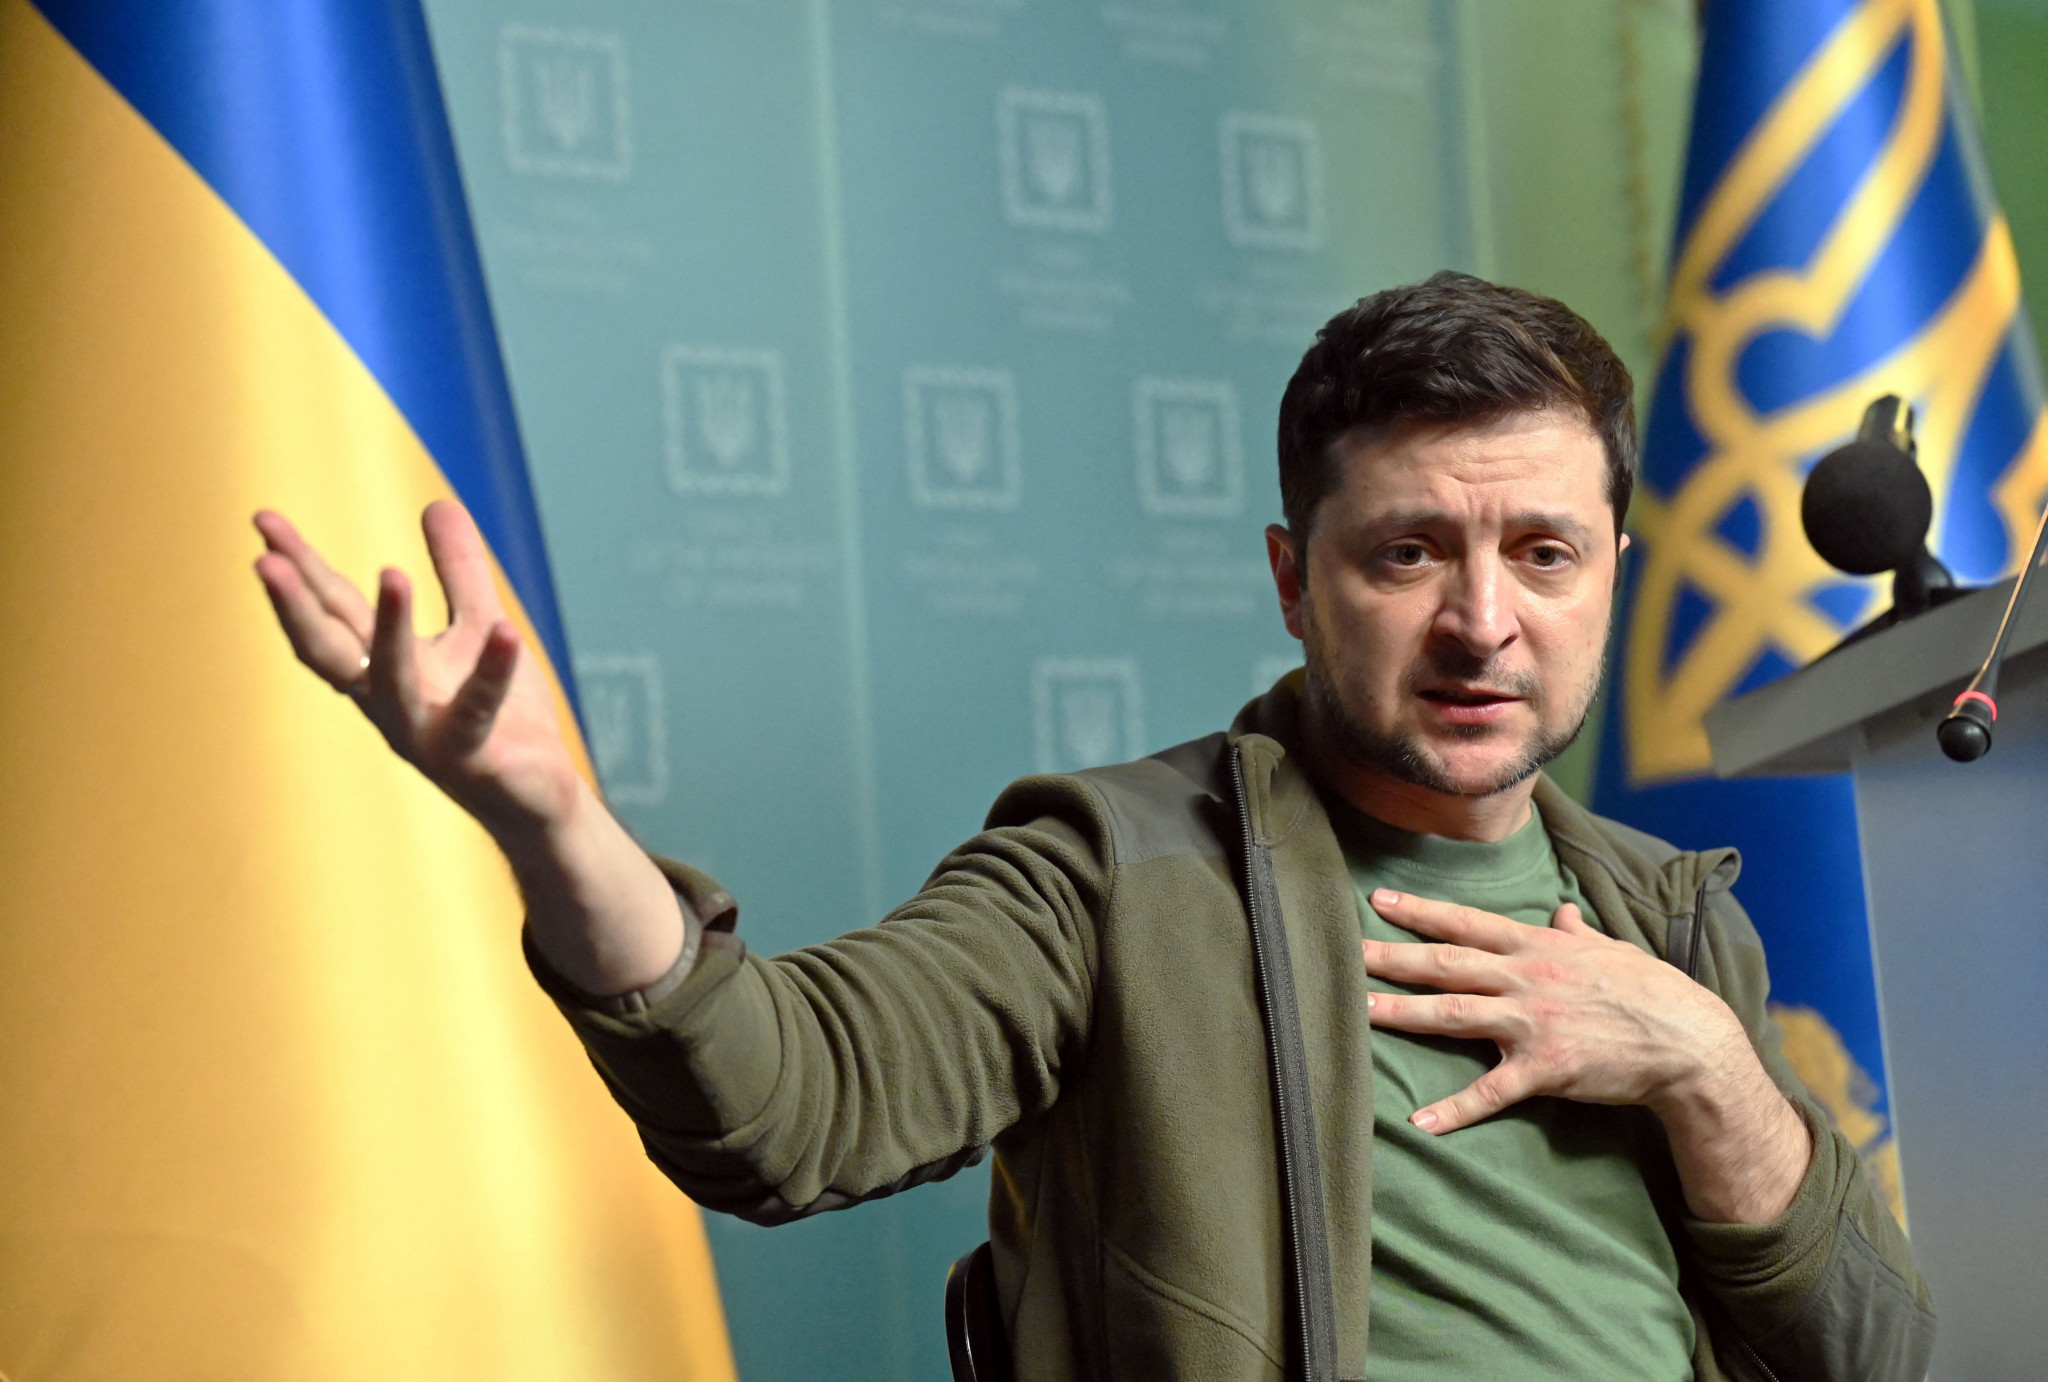 Zelenskyy thanks Ukraine's Paralympians for showing world "what strength we have"